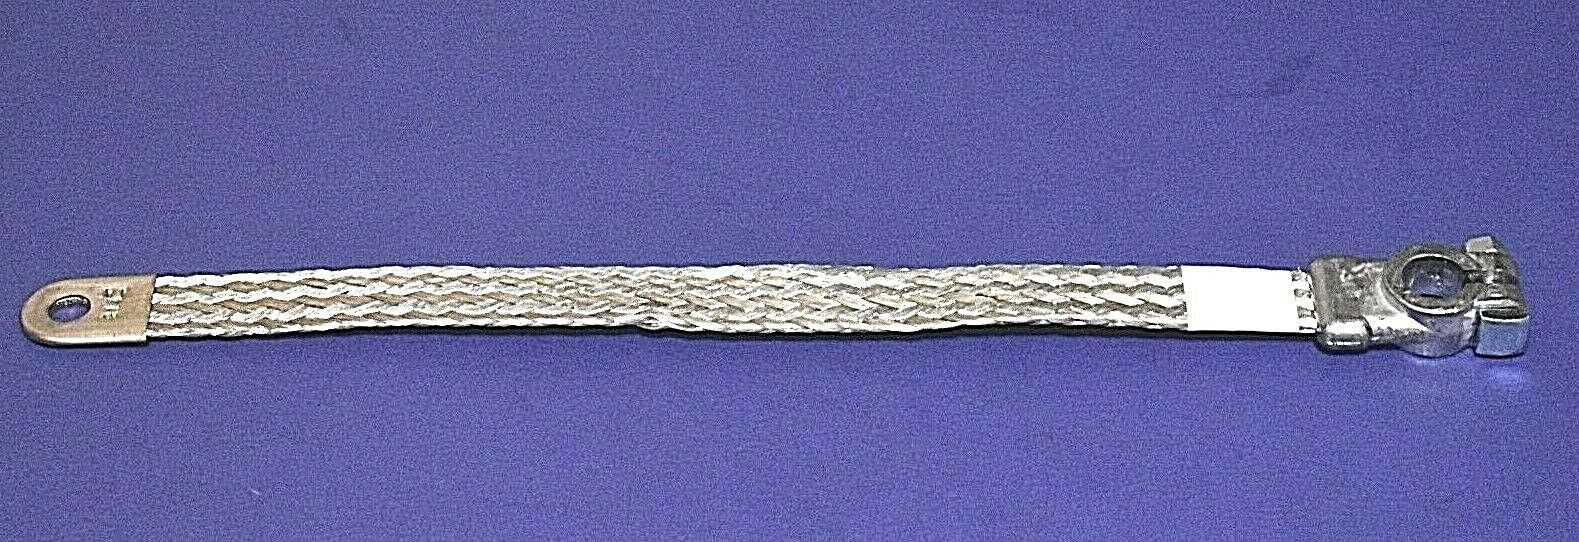 14" New Heavy Duty Braided Ground Strap Top Post Terminal 2 Gauge Battery Cable